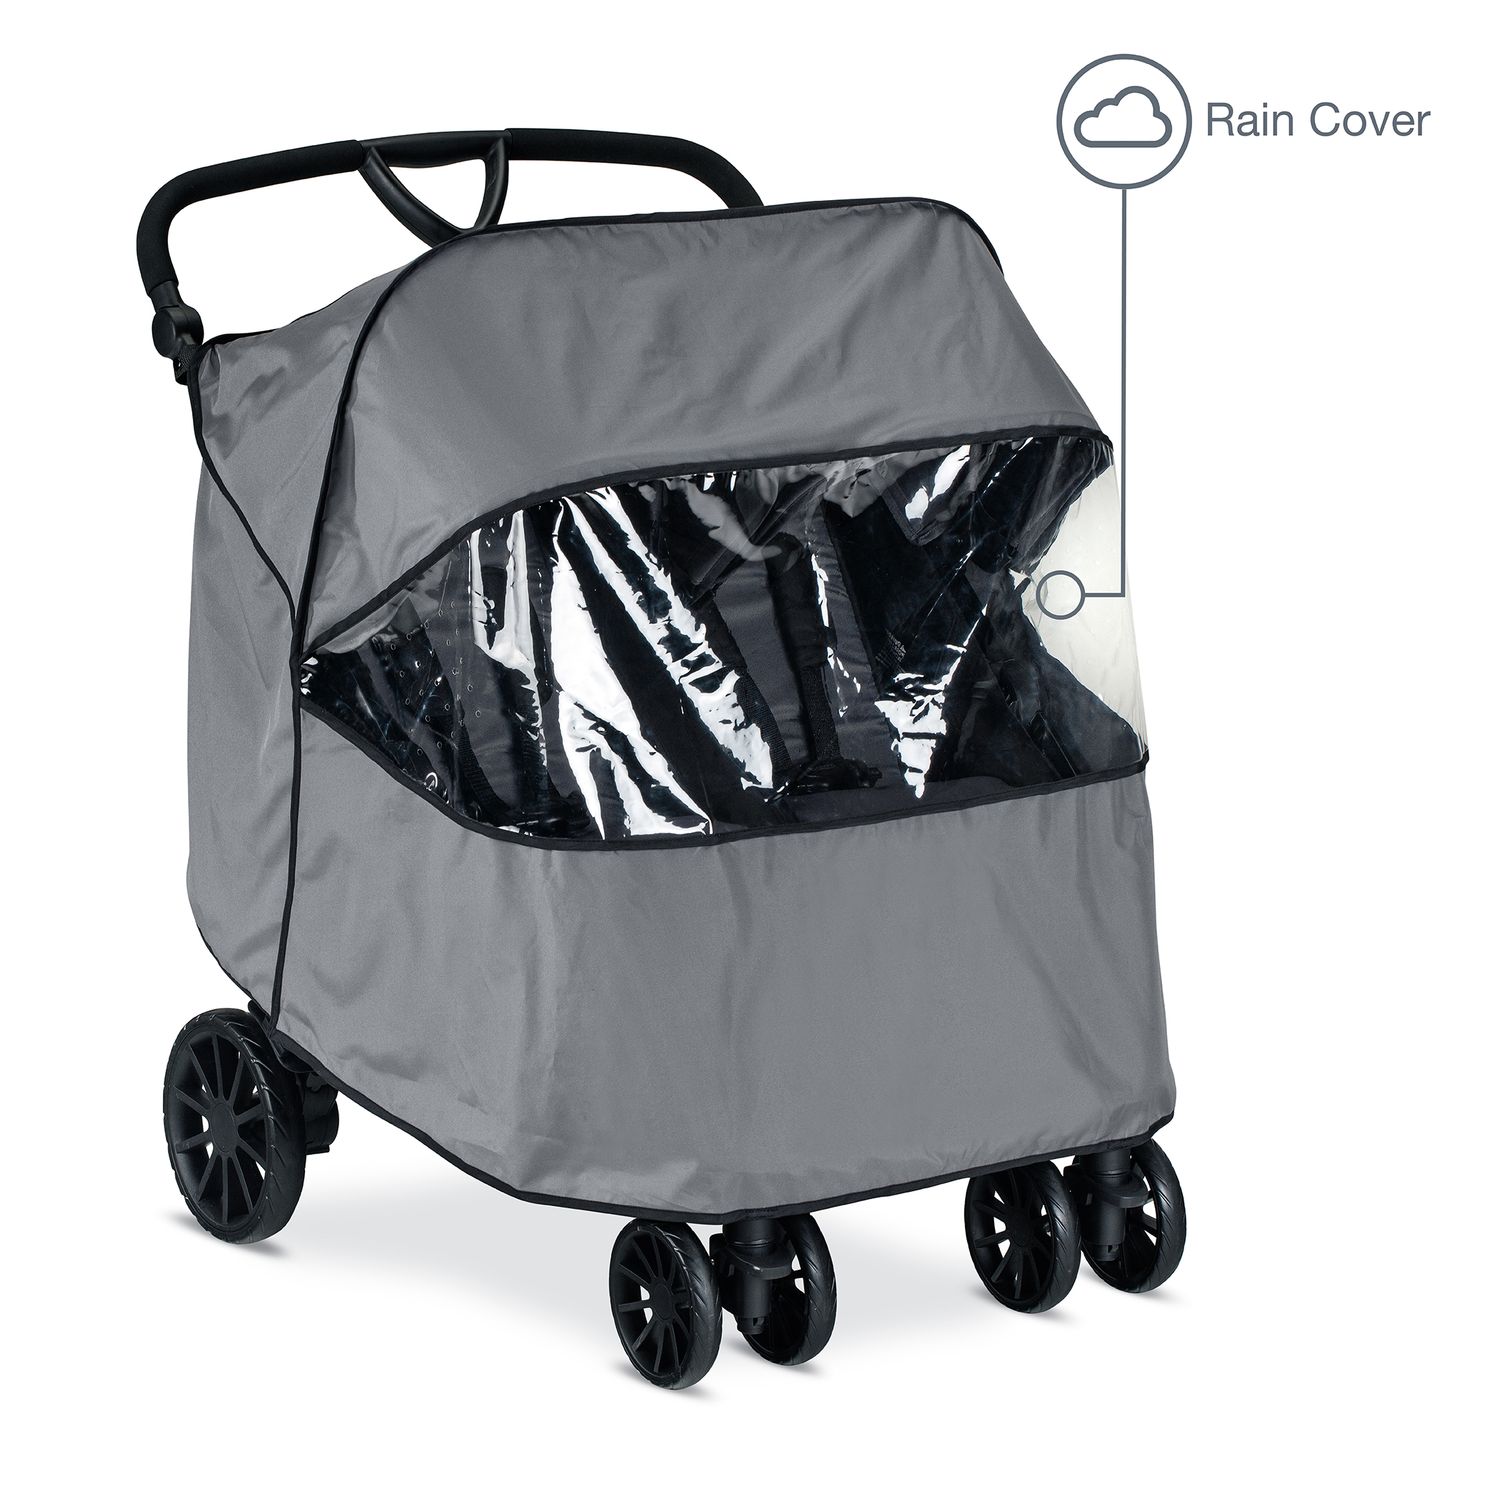 britax lively